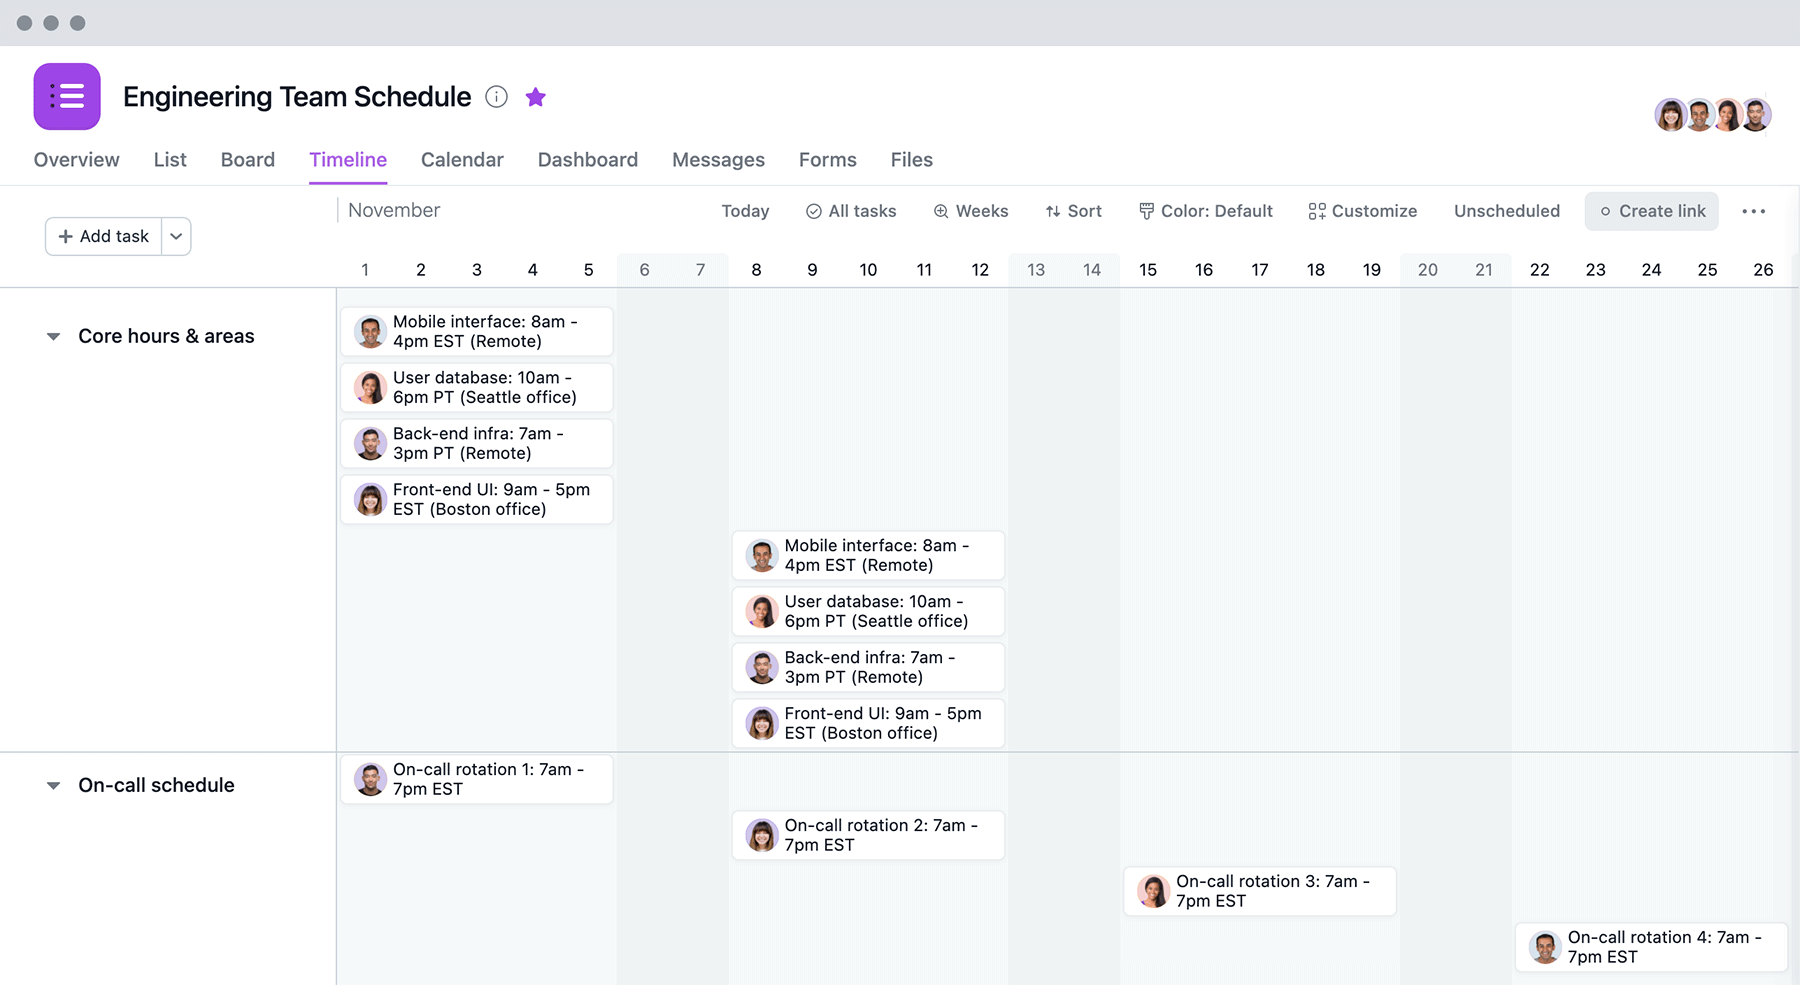 [Old Product UI] Engineering team schedule example (Timeline View)